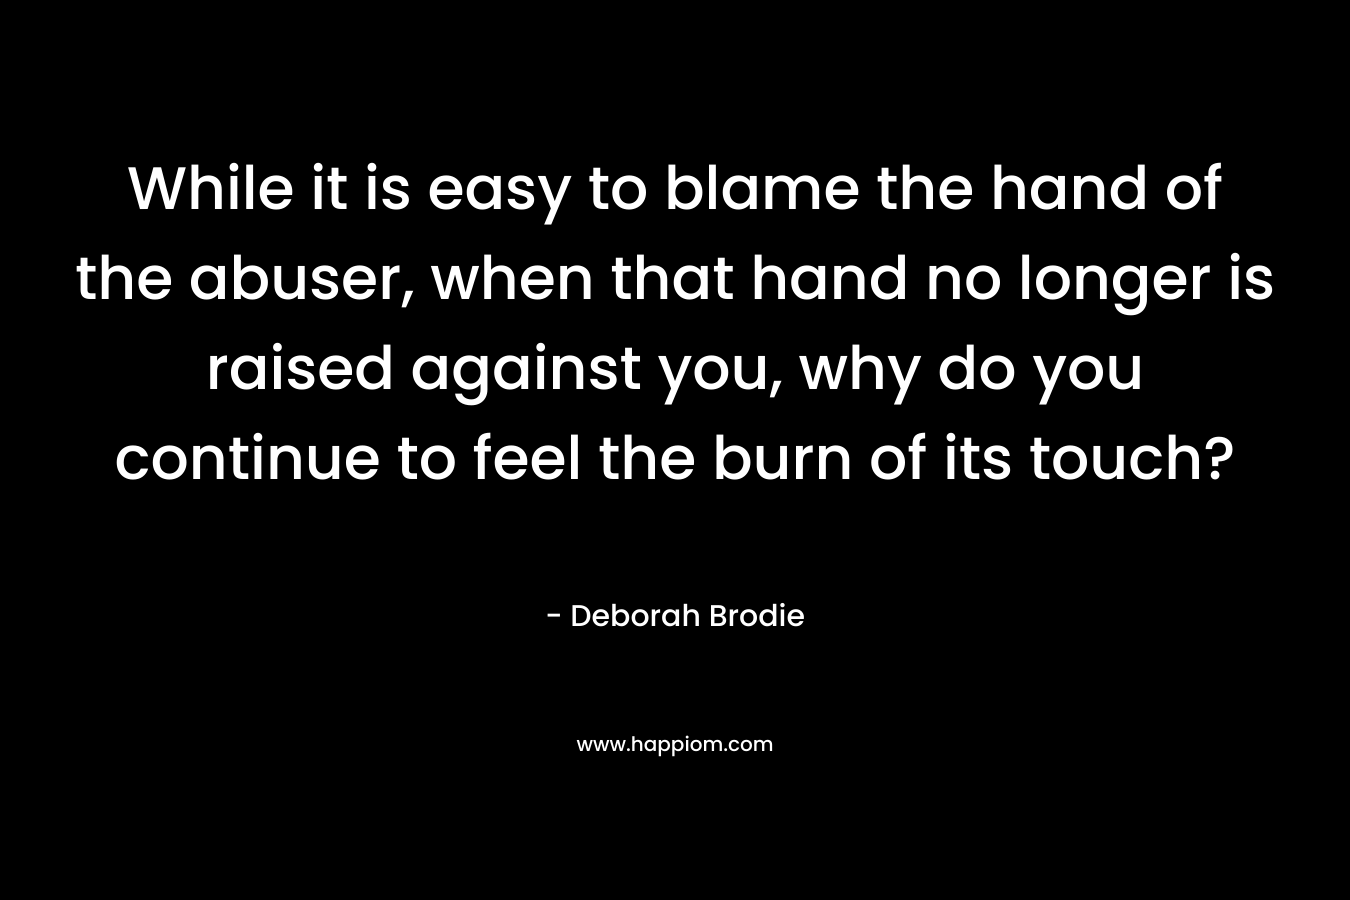 While it is easy to blame the hand of the abuser, when that hand no longer is raised against you, why do you continue to feel the burn of its touch?